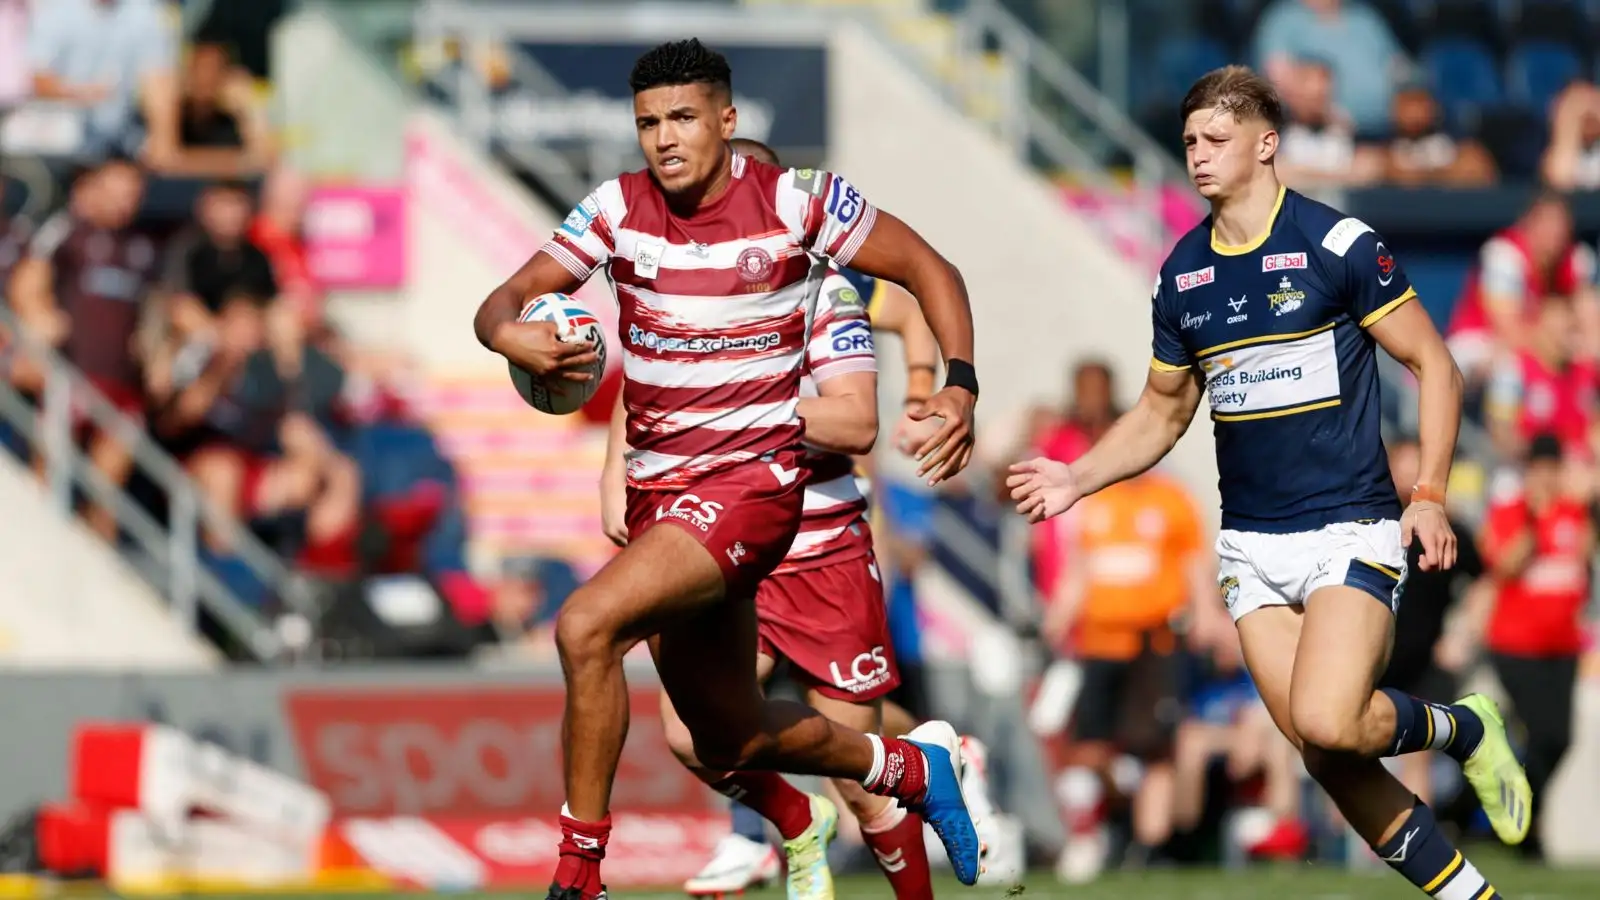 Wigan Warriors reclaim top spot, Leeds Rhinos’ play-off hopes hanging by a thread, Byrne blow – Five takeaways